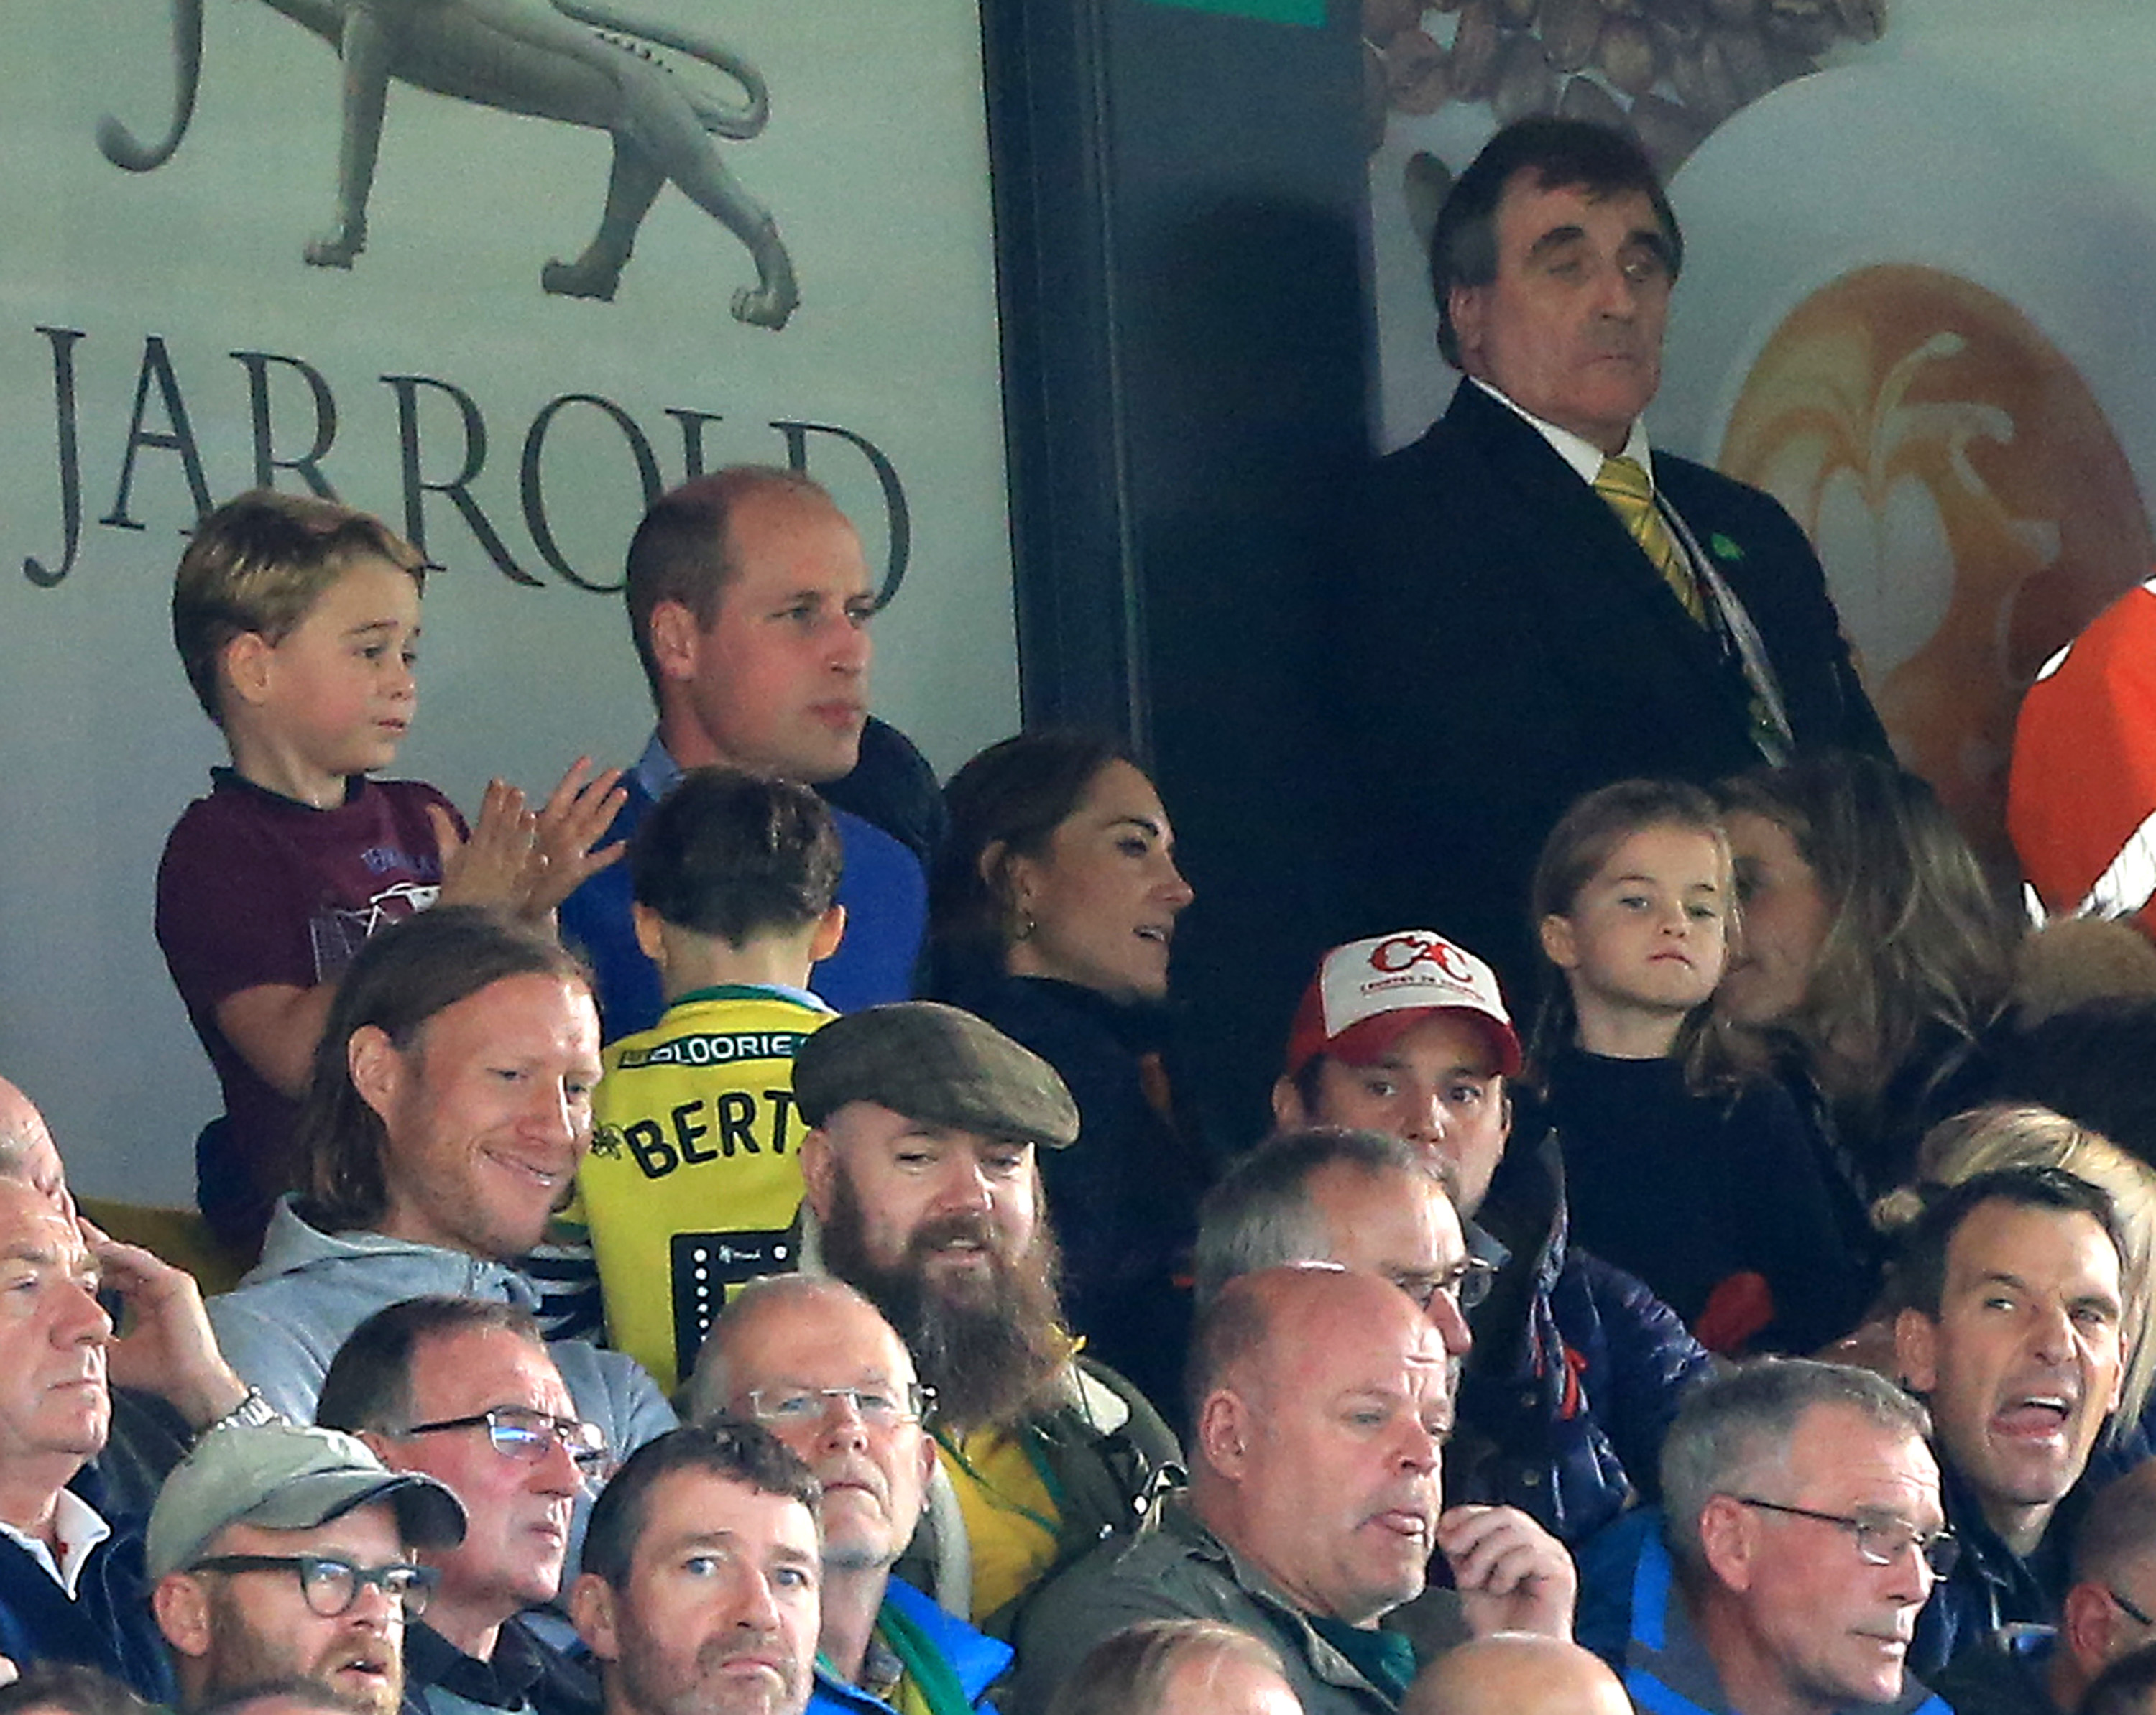 Prince George of Cambridge,  Prince William, Duke of Cambridge and Catherine, Duchess of Cambridge and Princess Charlotte of Cambridge are seen in the stands during the Premier League match between Norwich City and Aston Villa at Carrow Road.